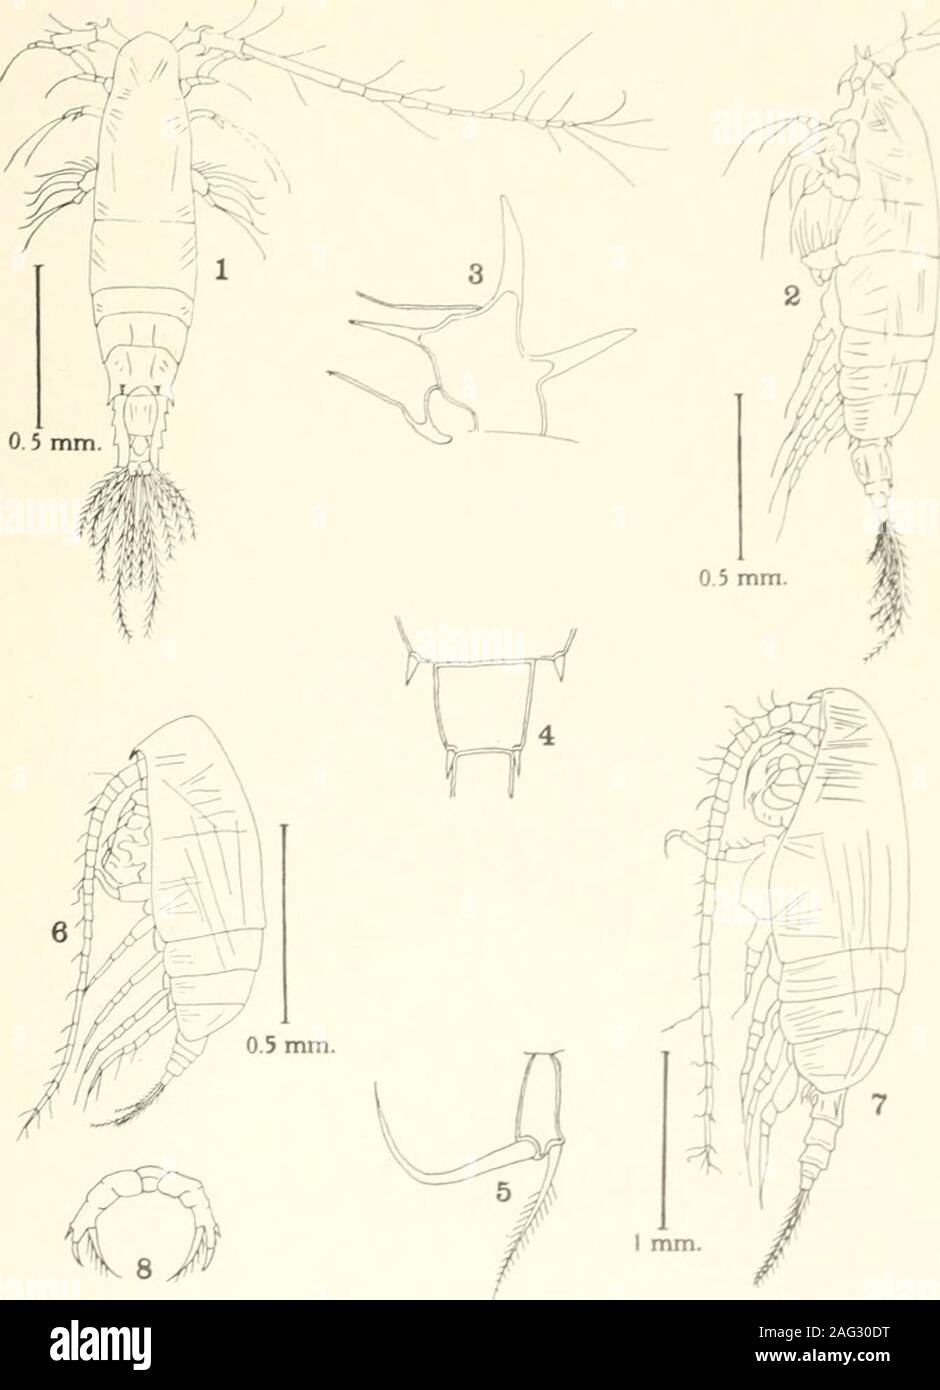 . Bulletin - United States National Museum. s.With, Carl. 1915. Copepoda I. Calanoida Amphascandria. Danish Ingolf-Expedition, vol. 3, pt. 4, 260 pp., 422 figs., 1 chart, 8 pis. WOLFENOEN, RICHARD NORRIS. 1904. Notes on the Copepoda of the North Atlantic Sea and the Faroe Channel. Journ. Marine Biol. Assoc. United Kingdom, new ser., vol. 7. No. 1, pp. 110-146, pi. 9.1905a. Notes on the collection of Copepoda. The Fauna and Geography of the Maldive and Laccadive Archipelagoes, vol. 2, suppl. 1, PP 1040, pis. 90-100.1905b.17 Plankton studies, preliminary notes upon new or interesting species. Pt Stock Photo